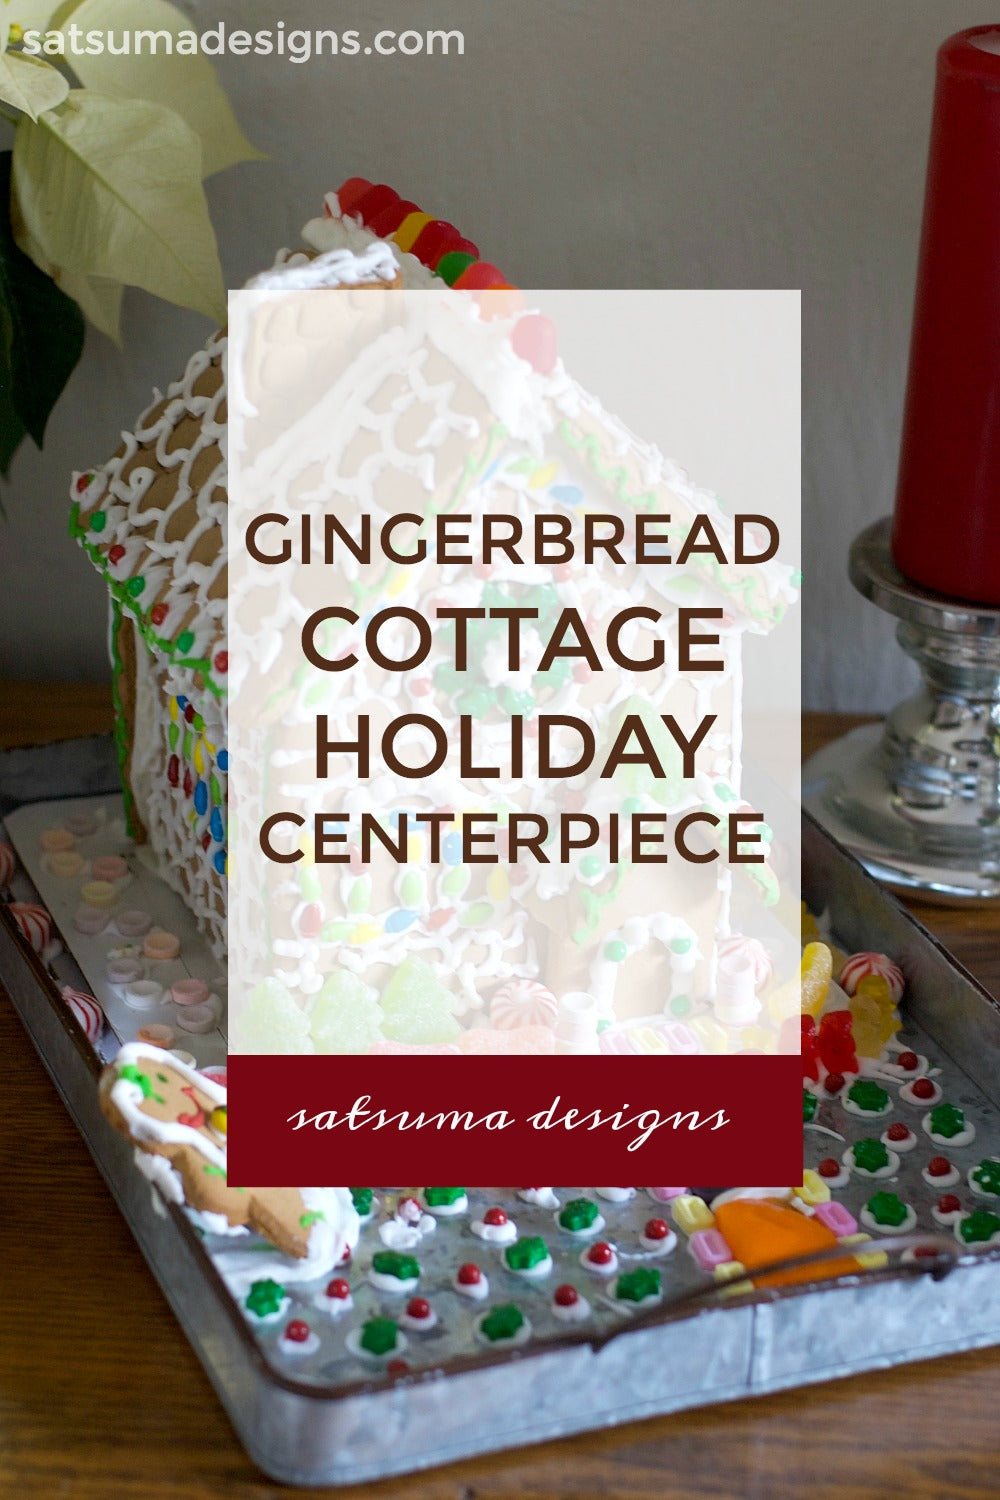 Make a sweet focal point with my gingerbread cottage holiday centerpiece to enjoy all season. Store bought gingerbread house is set in a metal tray for a vintage look that's easy to move around! #gingerbread #gingerbreadhouse #gingerbreadcottage #holiday #centerpiece #Christmas #familydinner